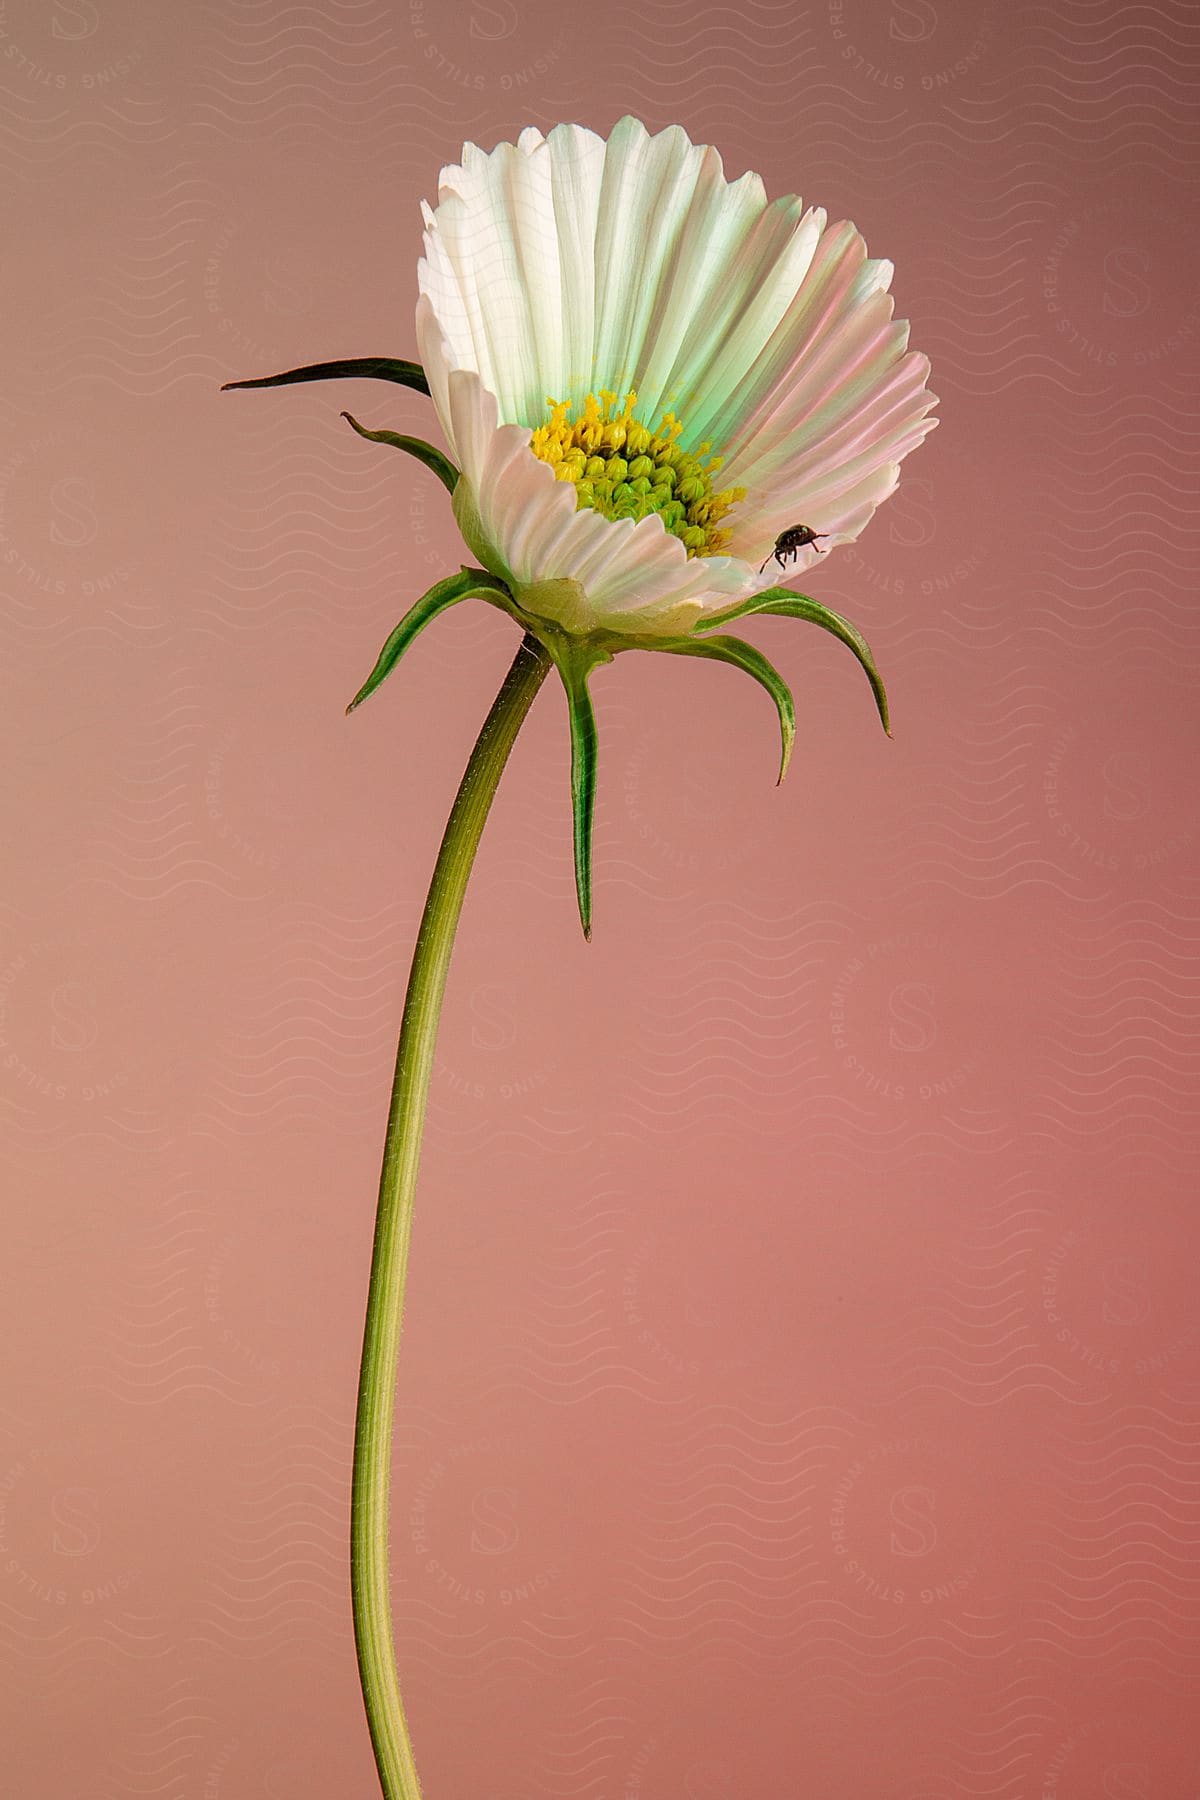 A white flower with a bee crawling on it.